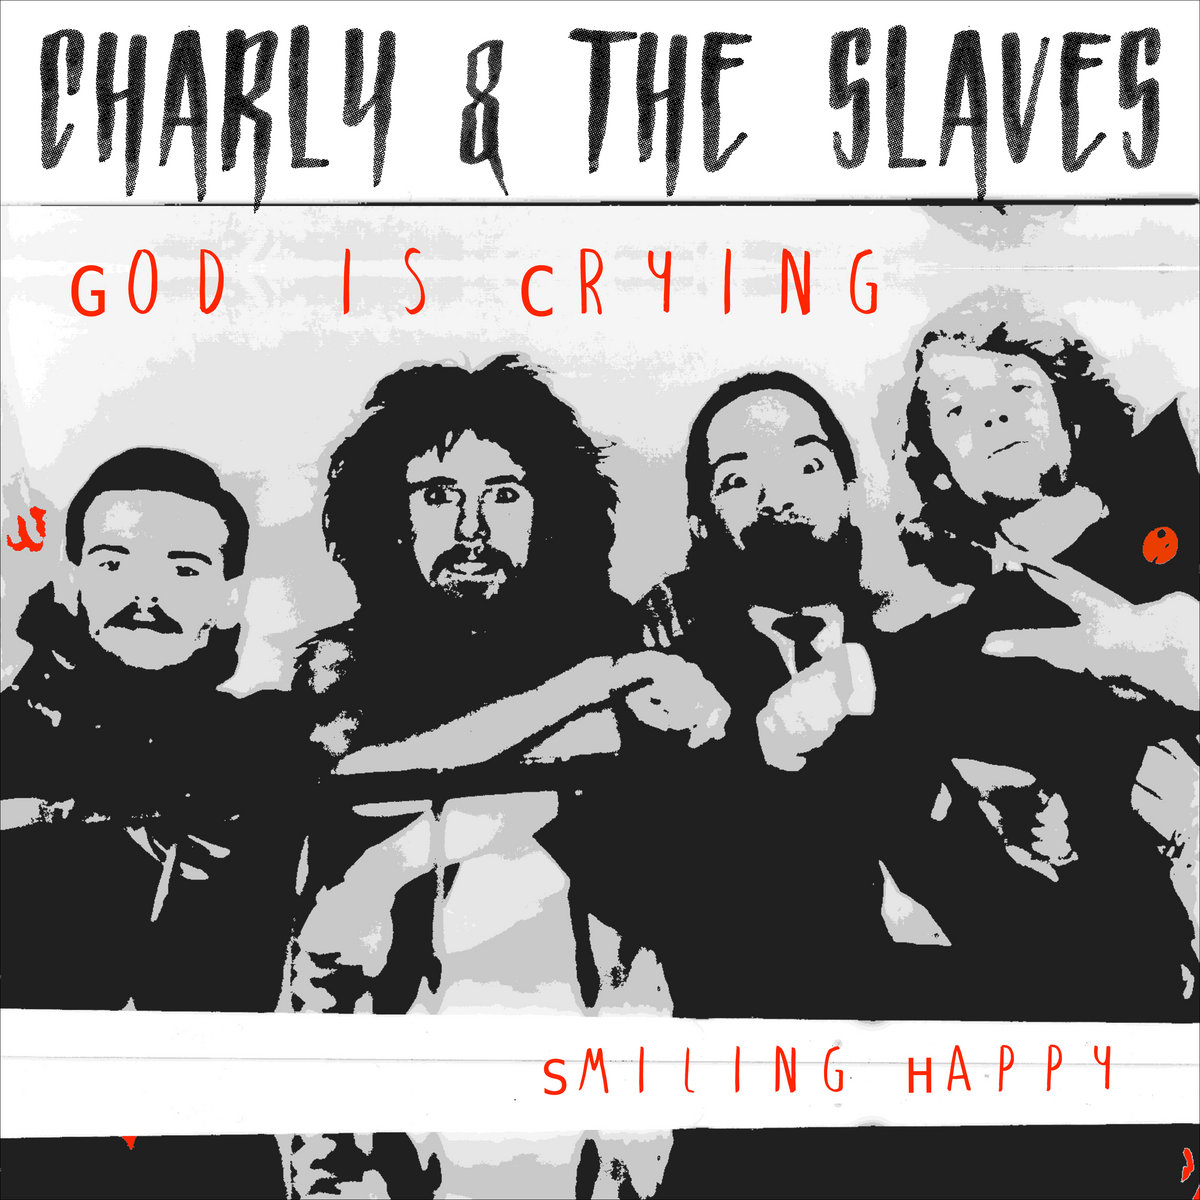 Charly & the slaves